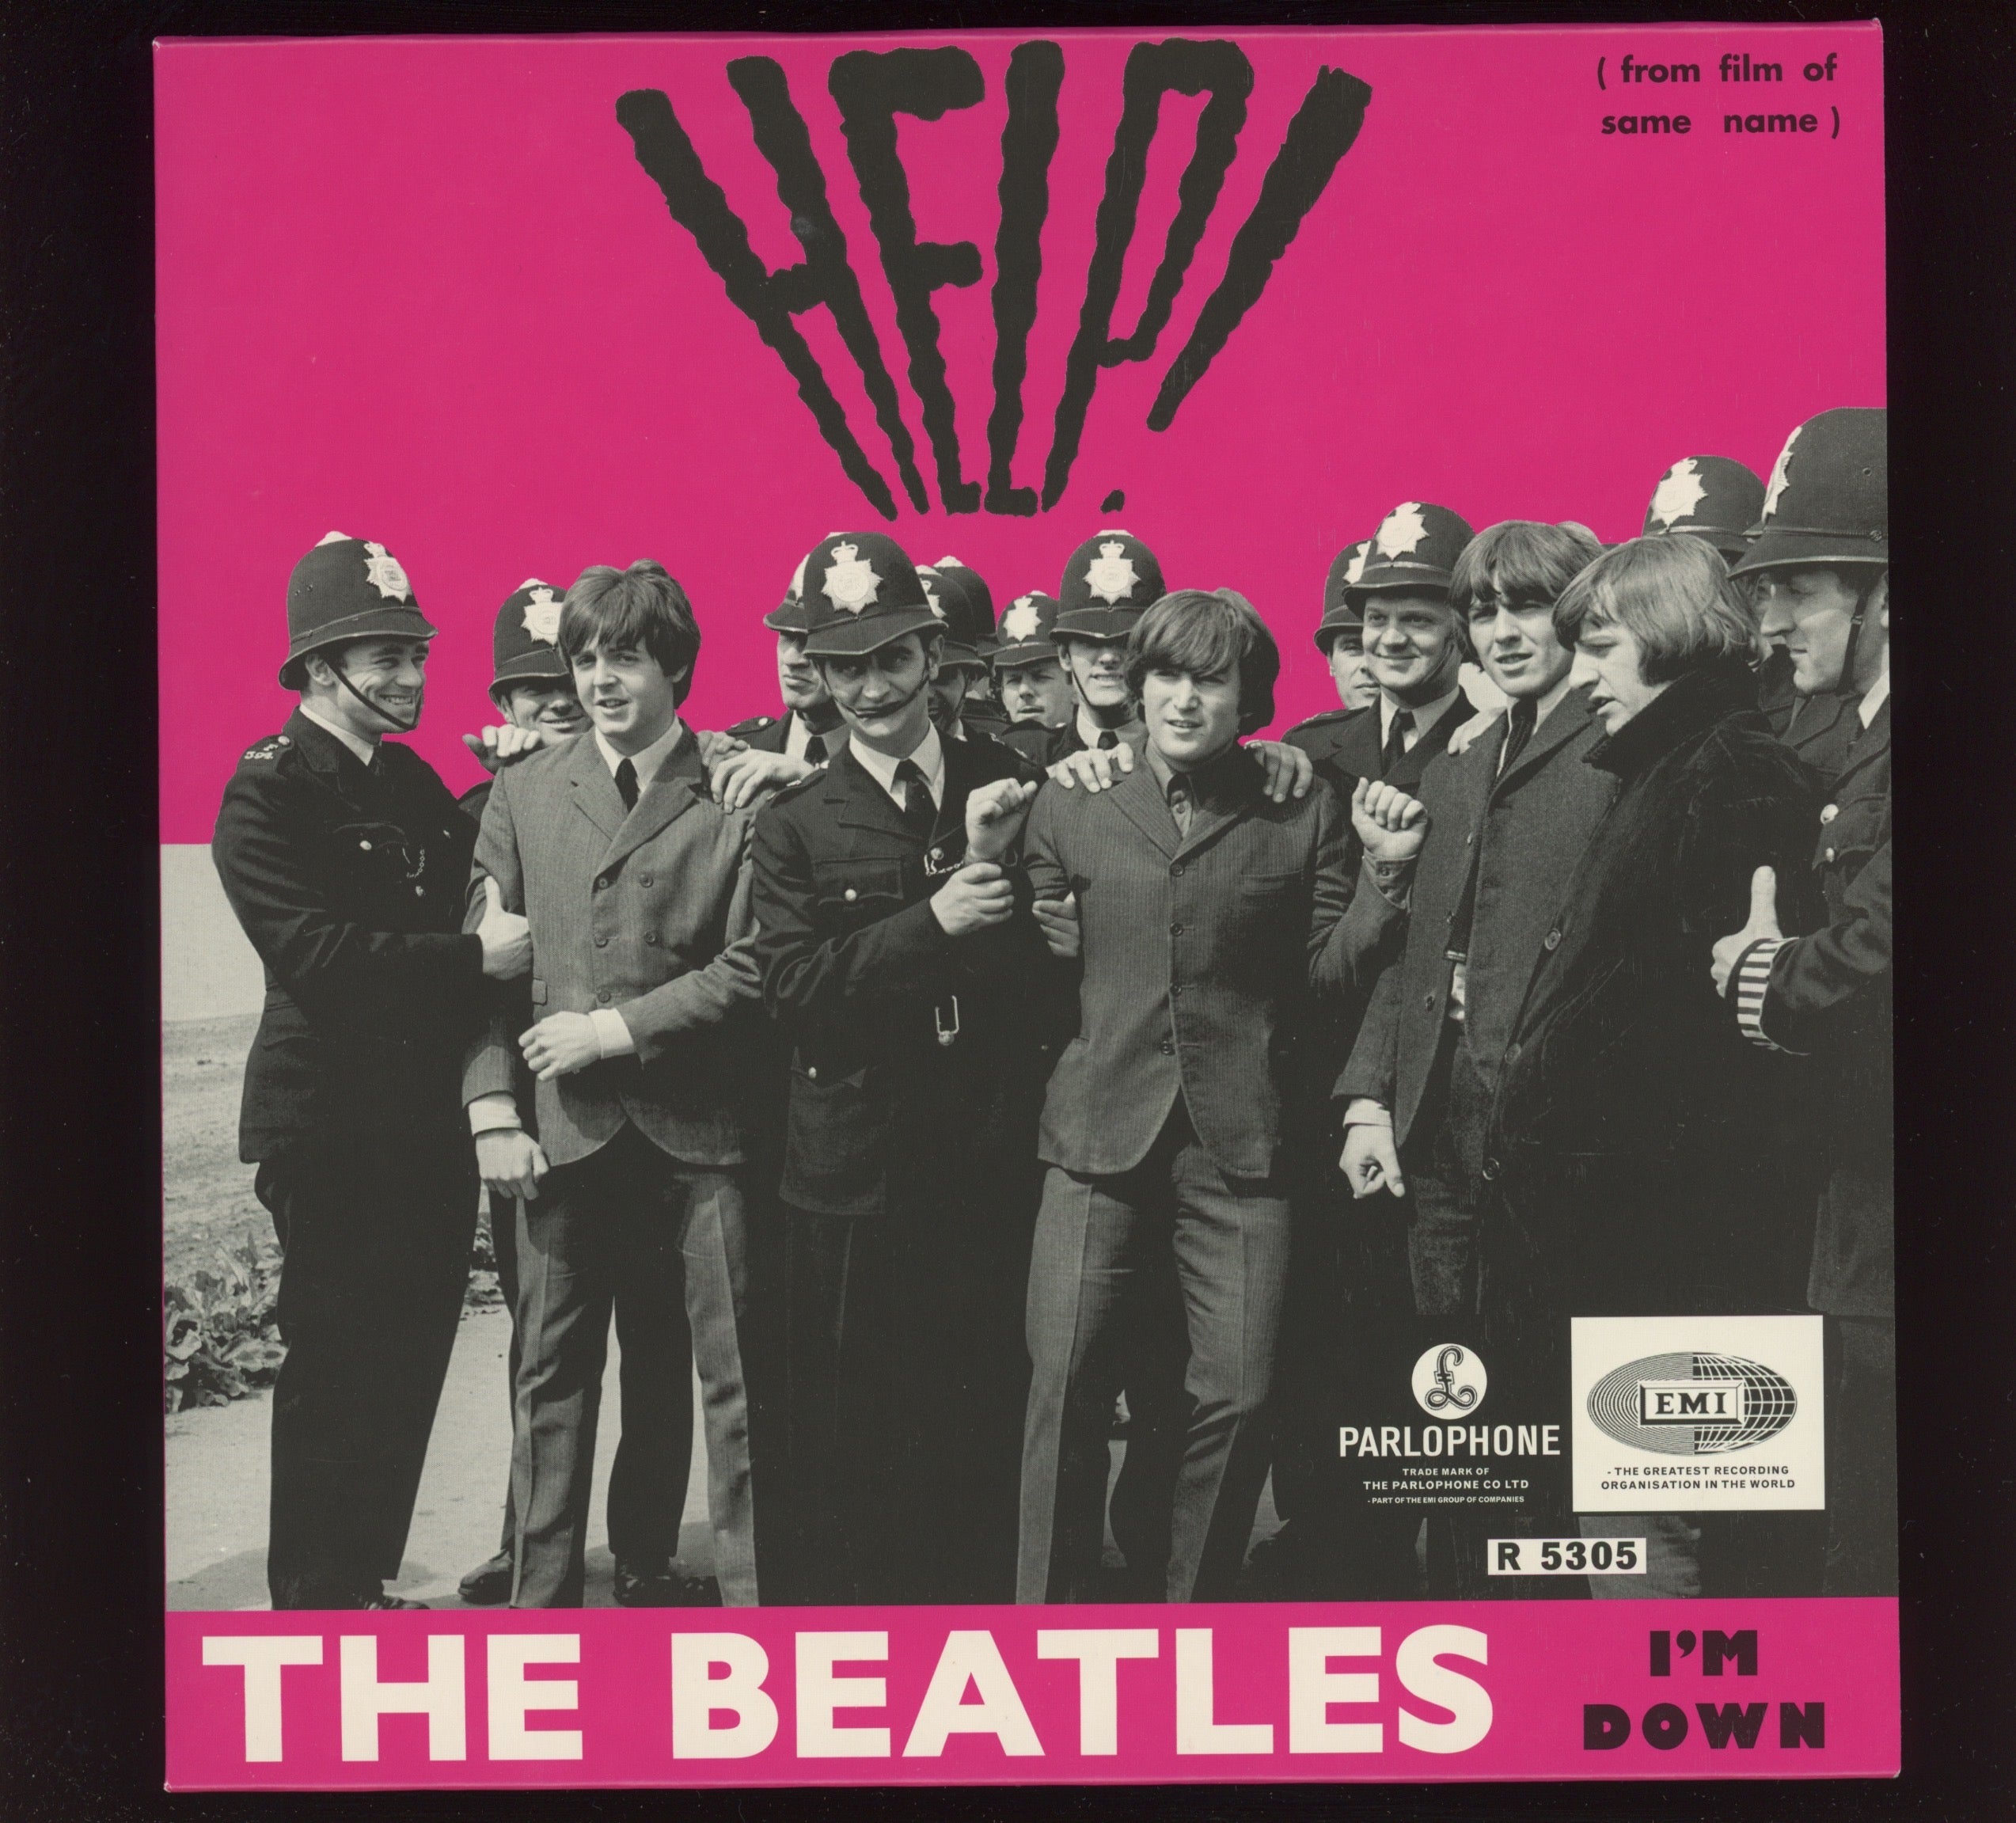 The Beatles - Help! / I’m Down on Parlophone 7" Reissue With Picture Cover